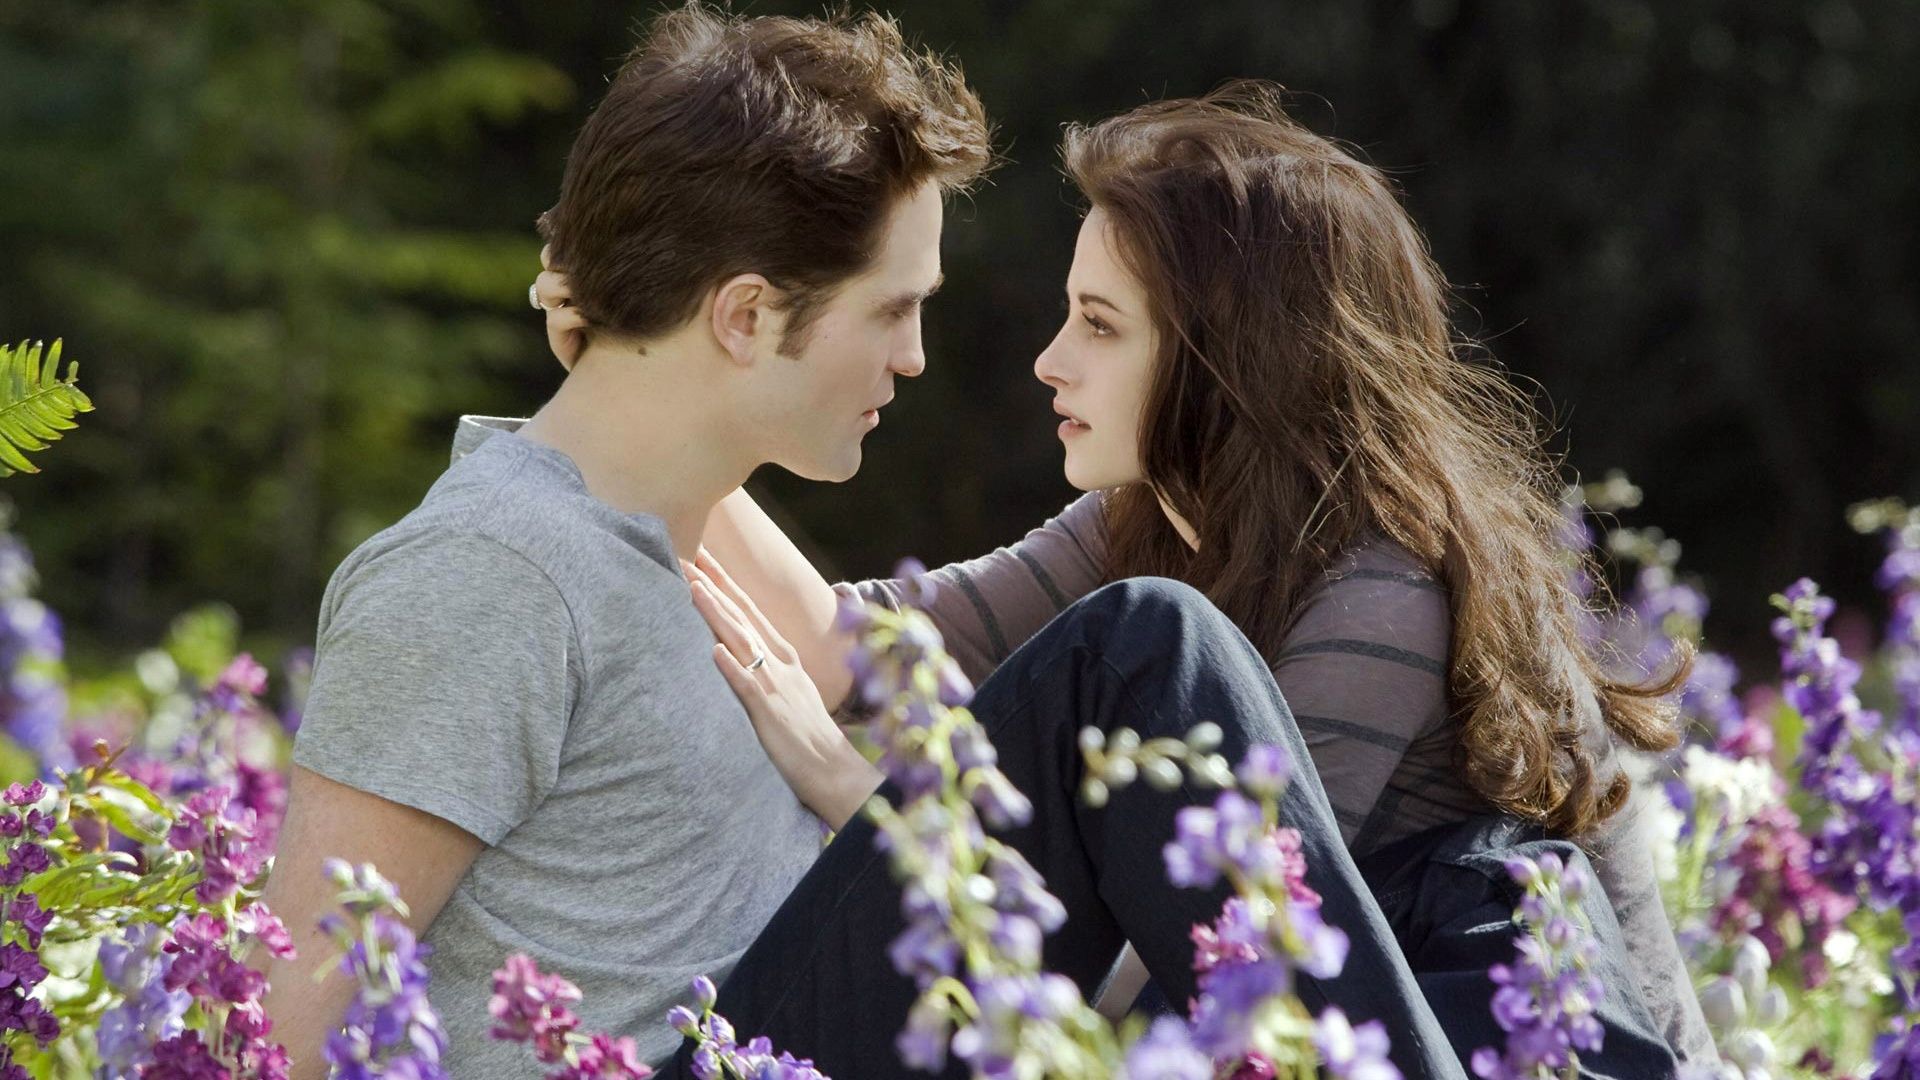 Download 1920x1080 HD Wallpapers twilight couple close